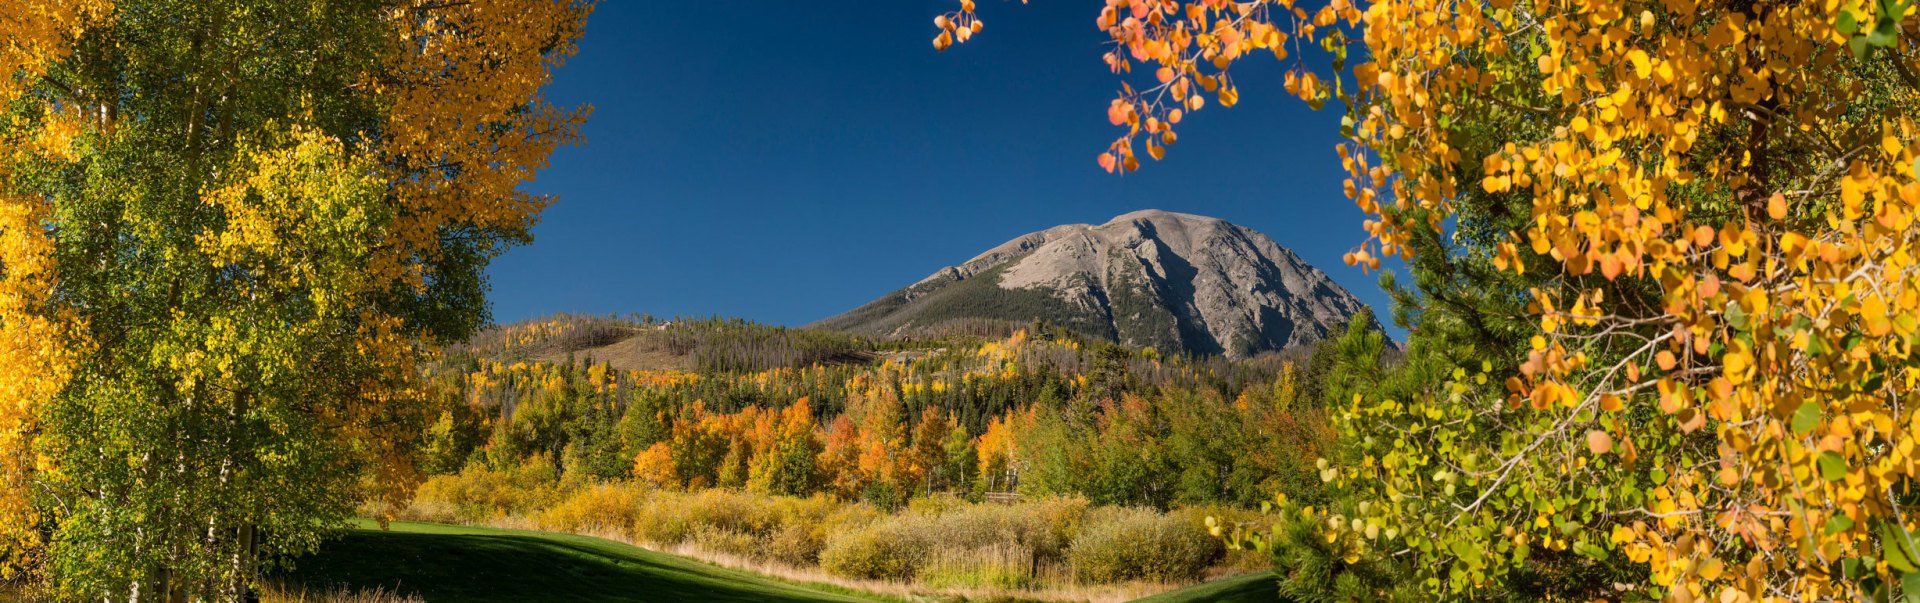 Panoramic Image of Fall in Summit County, Colorado